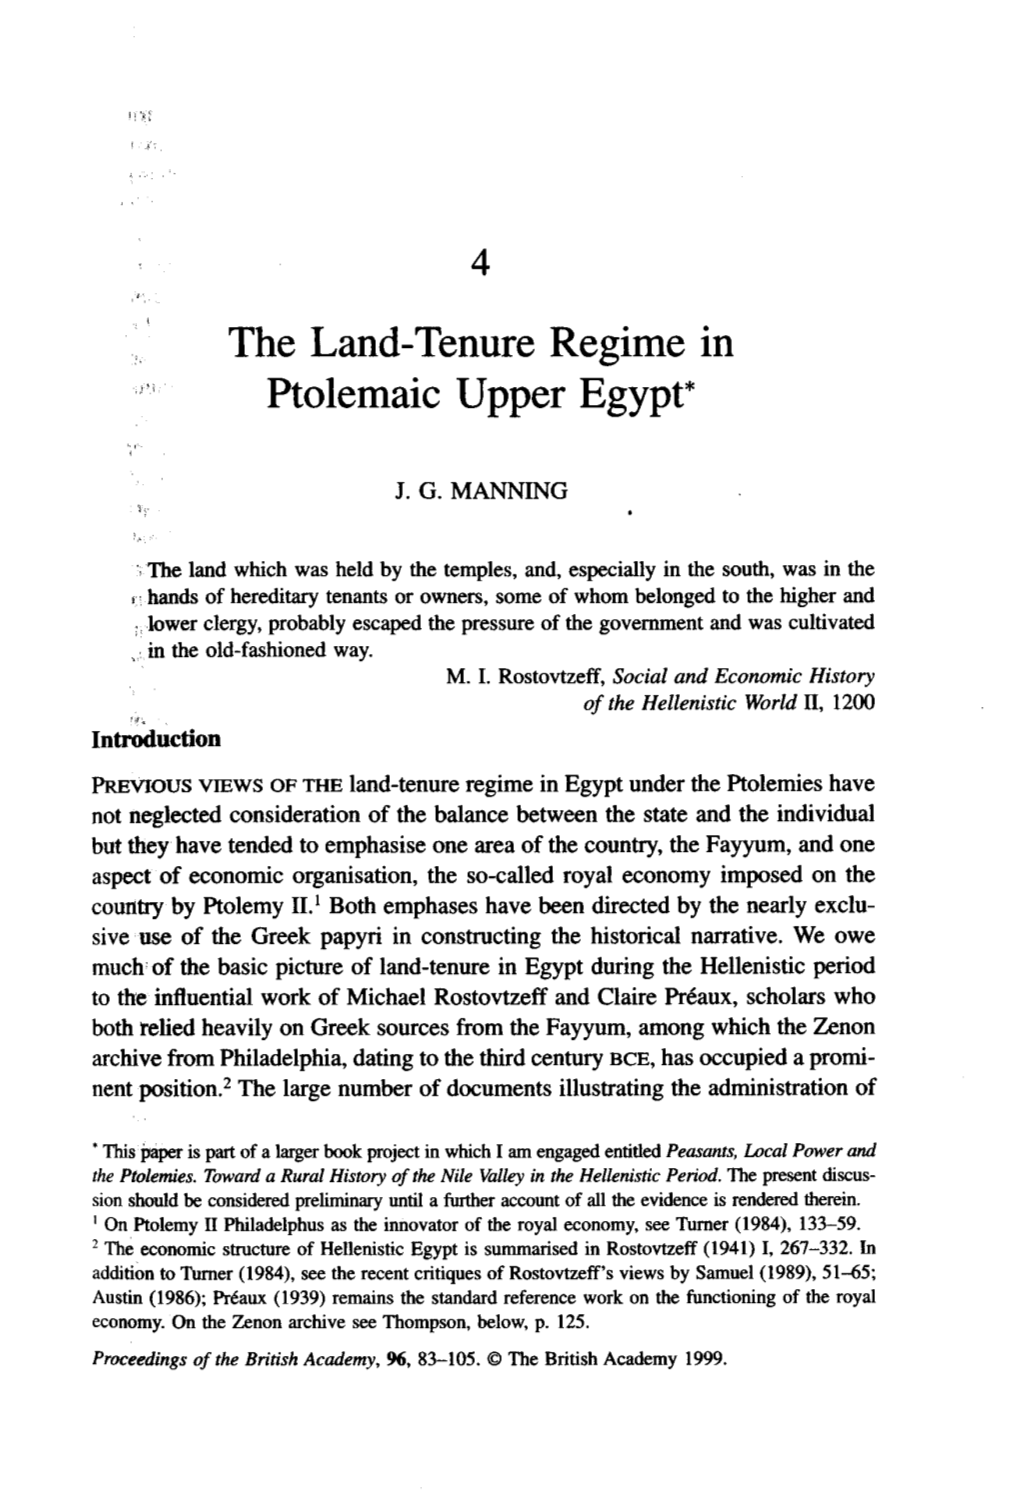 The Land-Tenure Regime in Ptolemaic Upper Egypt*